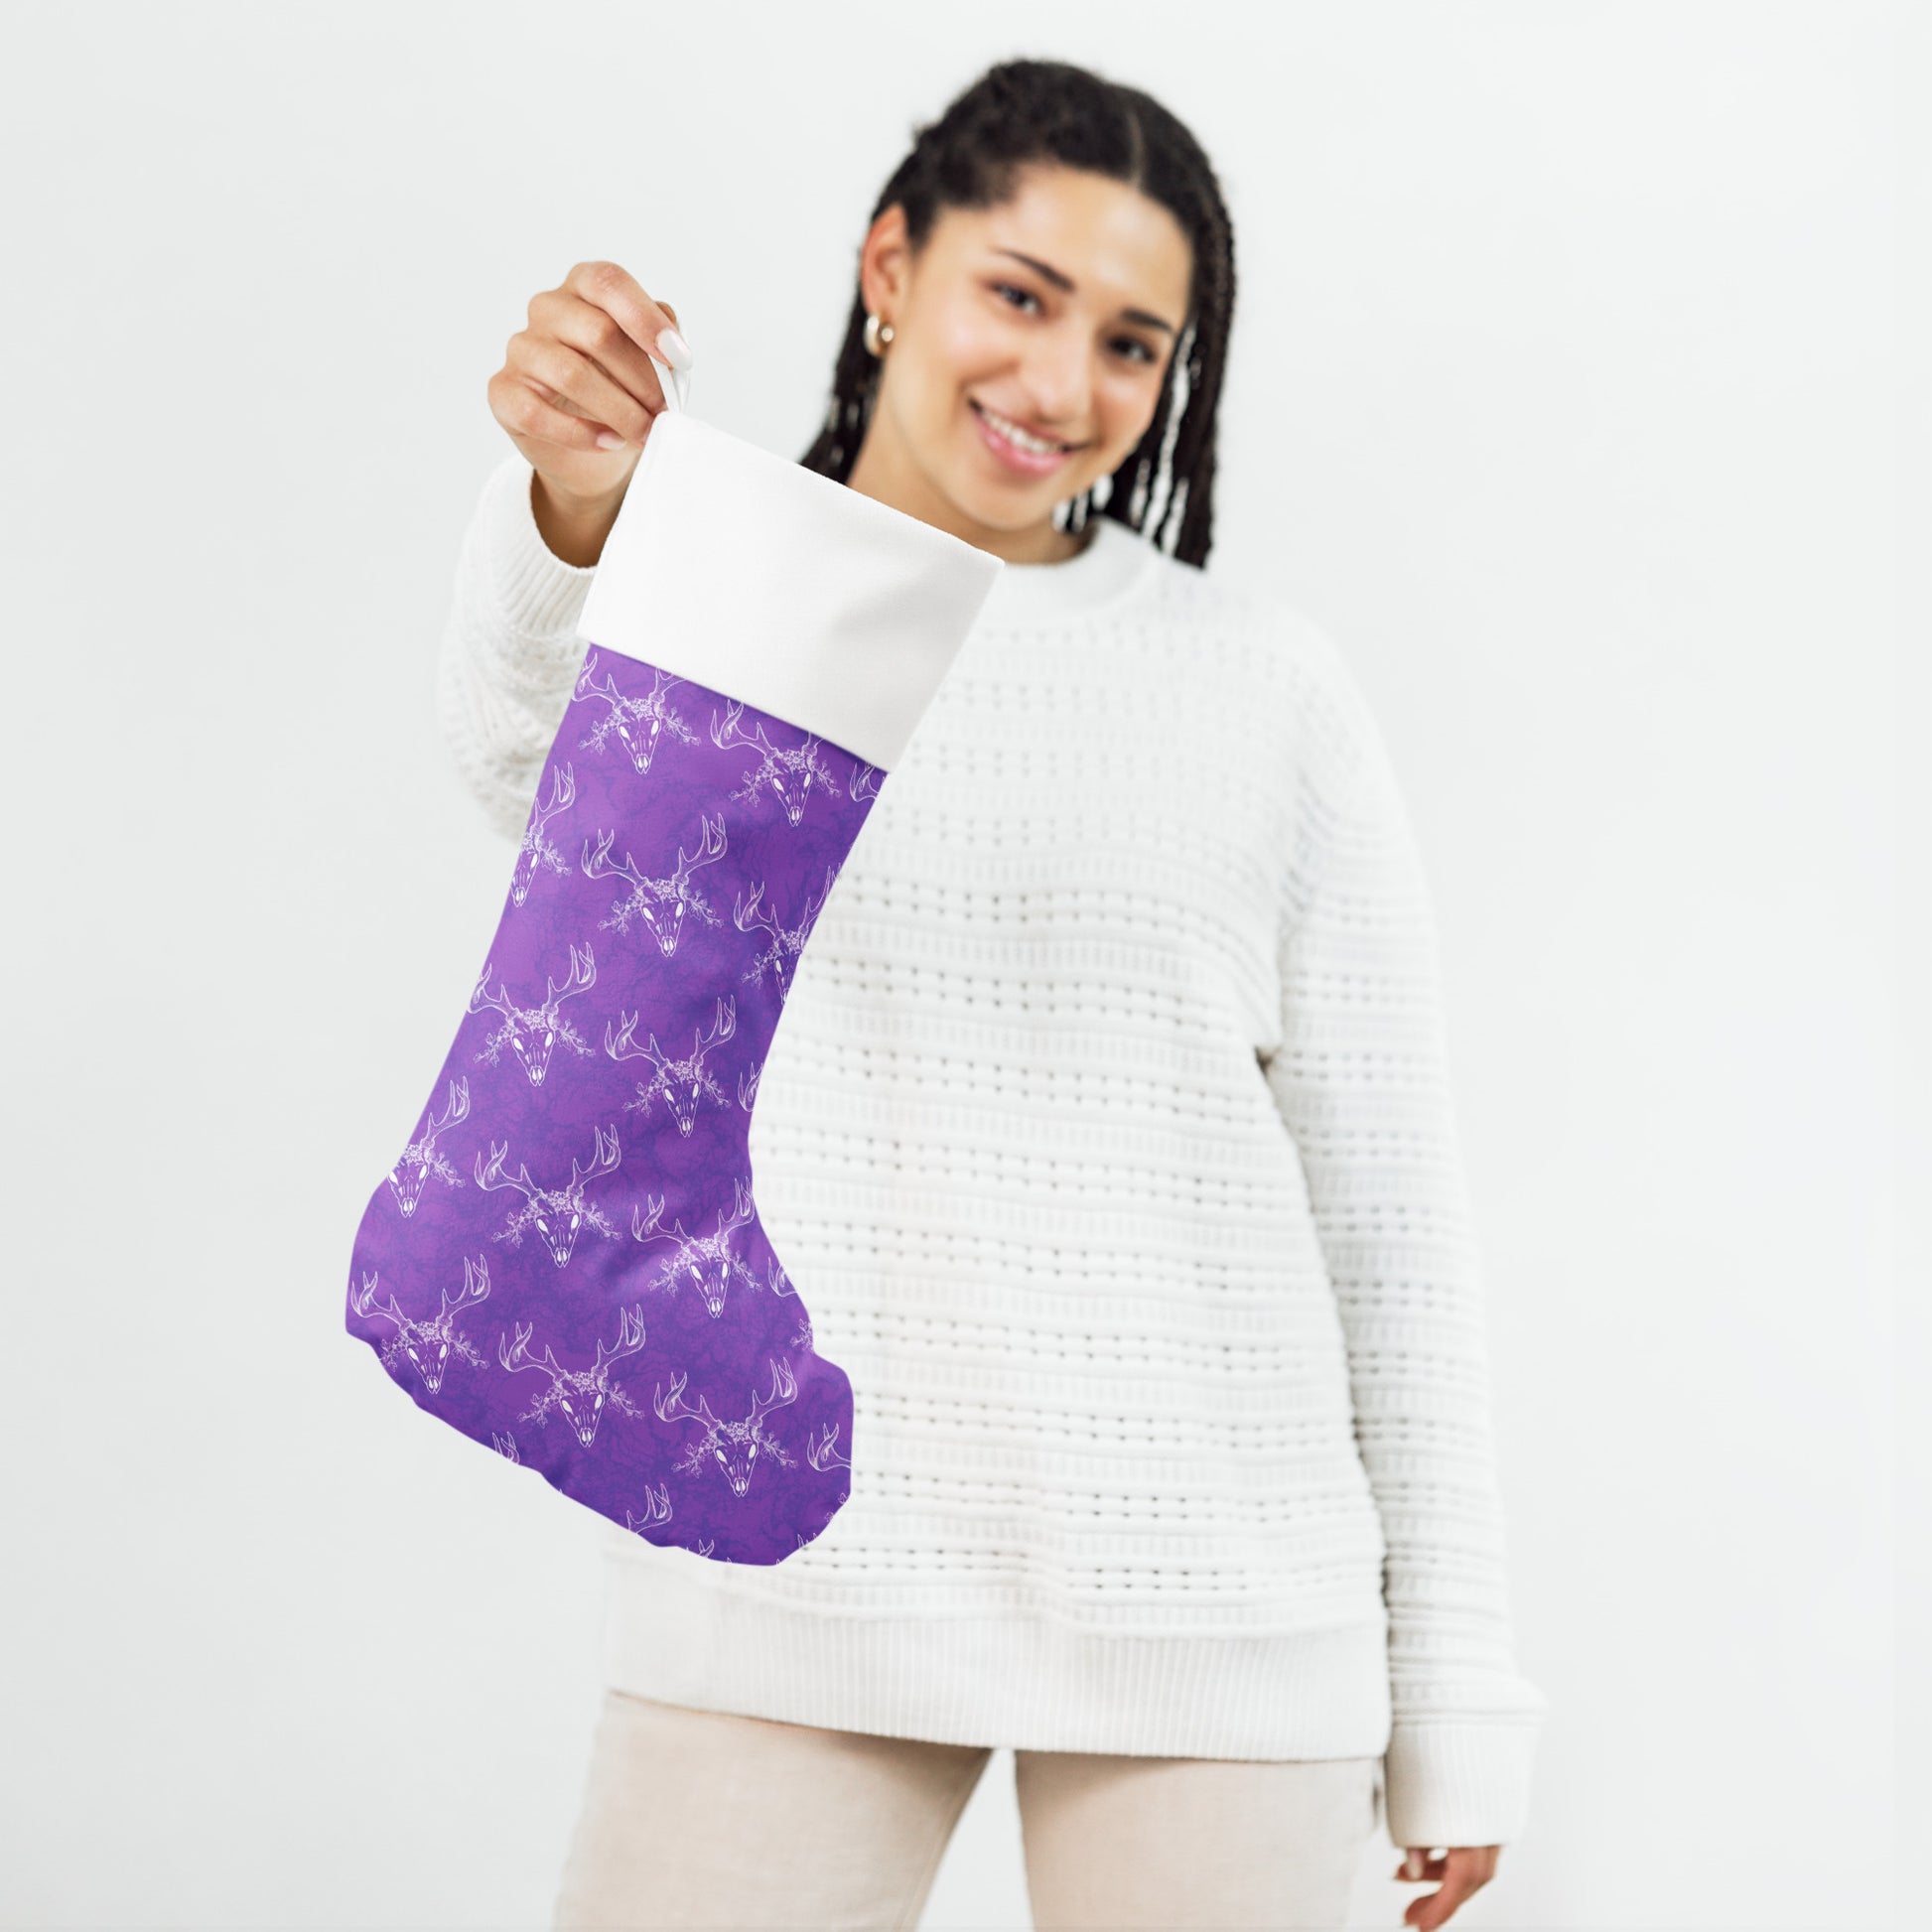 Limited Edition Purple Deer Skull Christmas Stocking.  7 by 18 inches. The front has a hand-illustrated deer skull design on a purple background with an off-white polyester fabric on the back. It has a white fold-over cuff and a loop for hanging. Shown being held by female model.